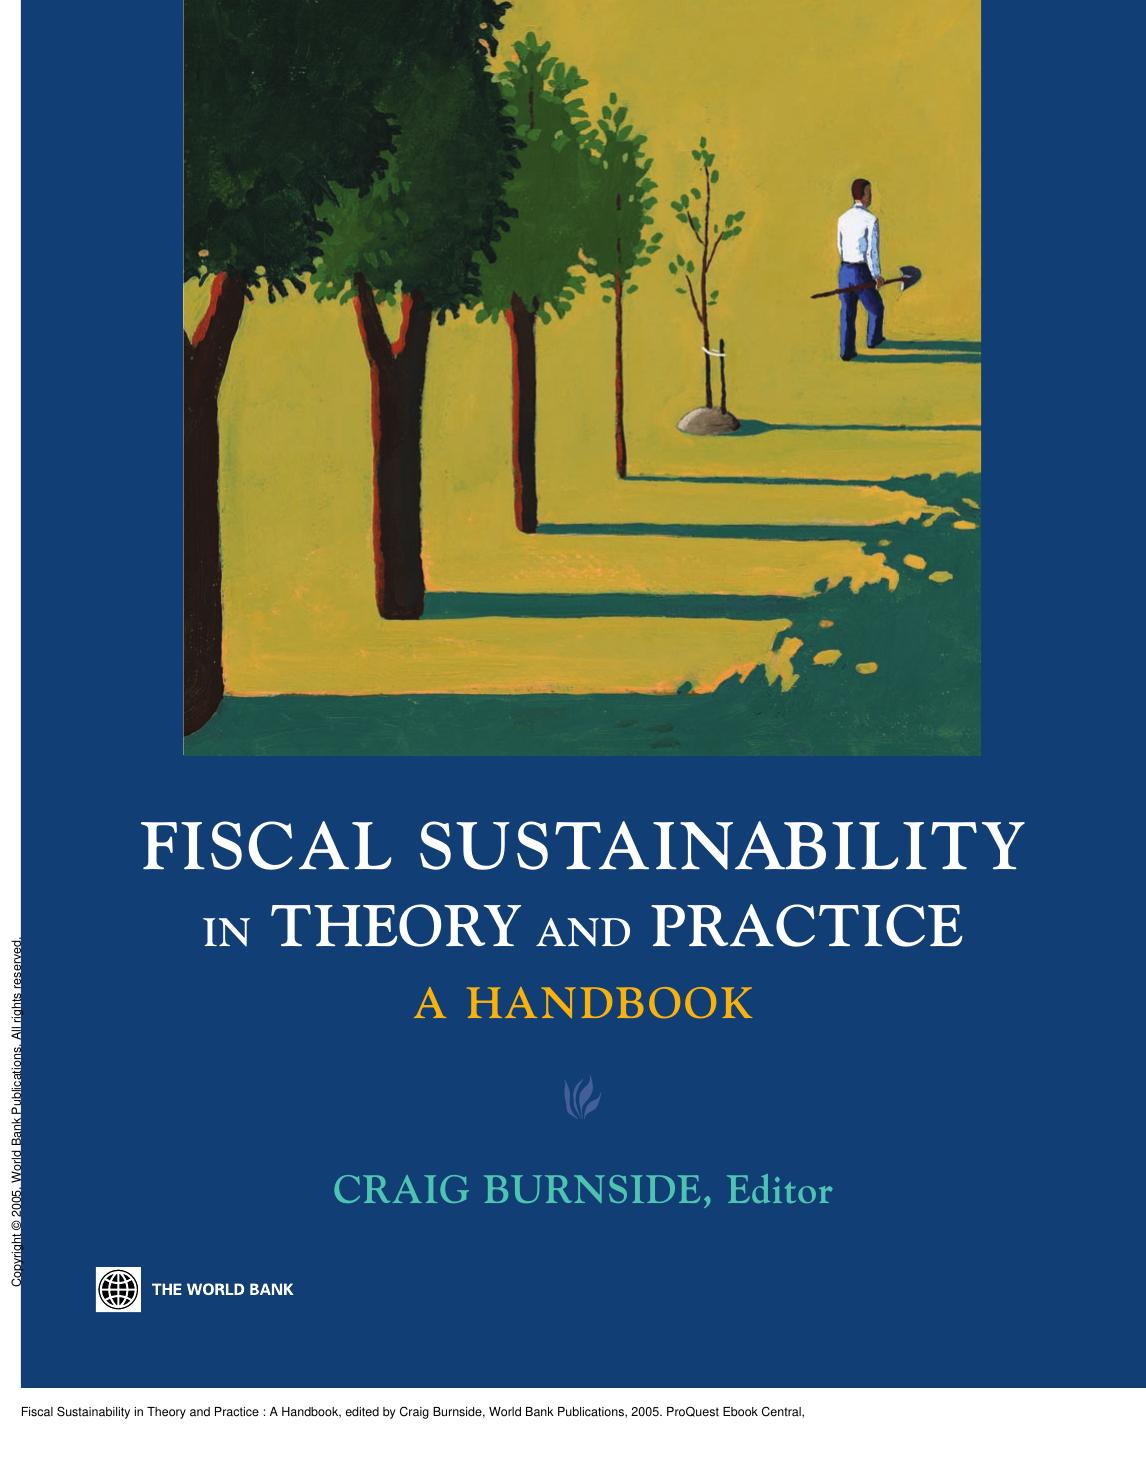 Fiscal Sustainability in Theory and Practice : A Handbook by Craig Burnside